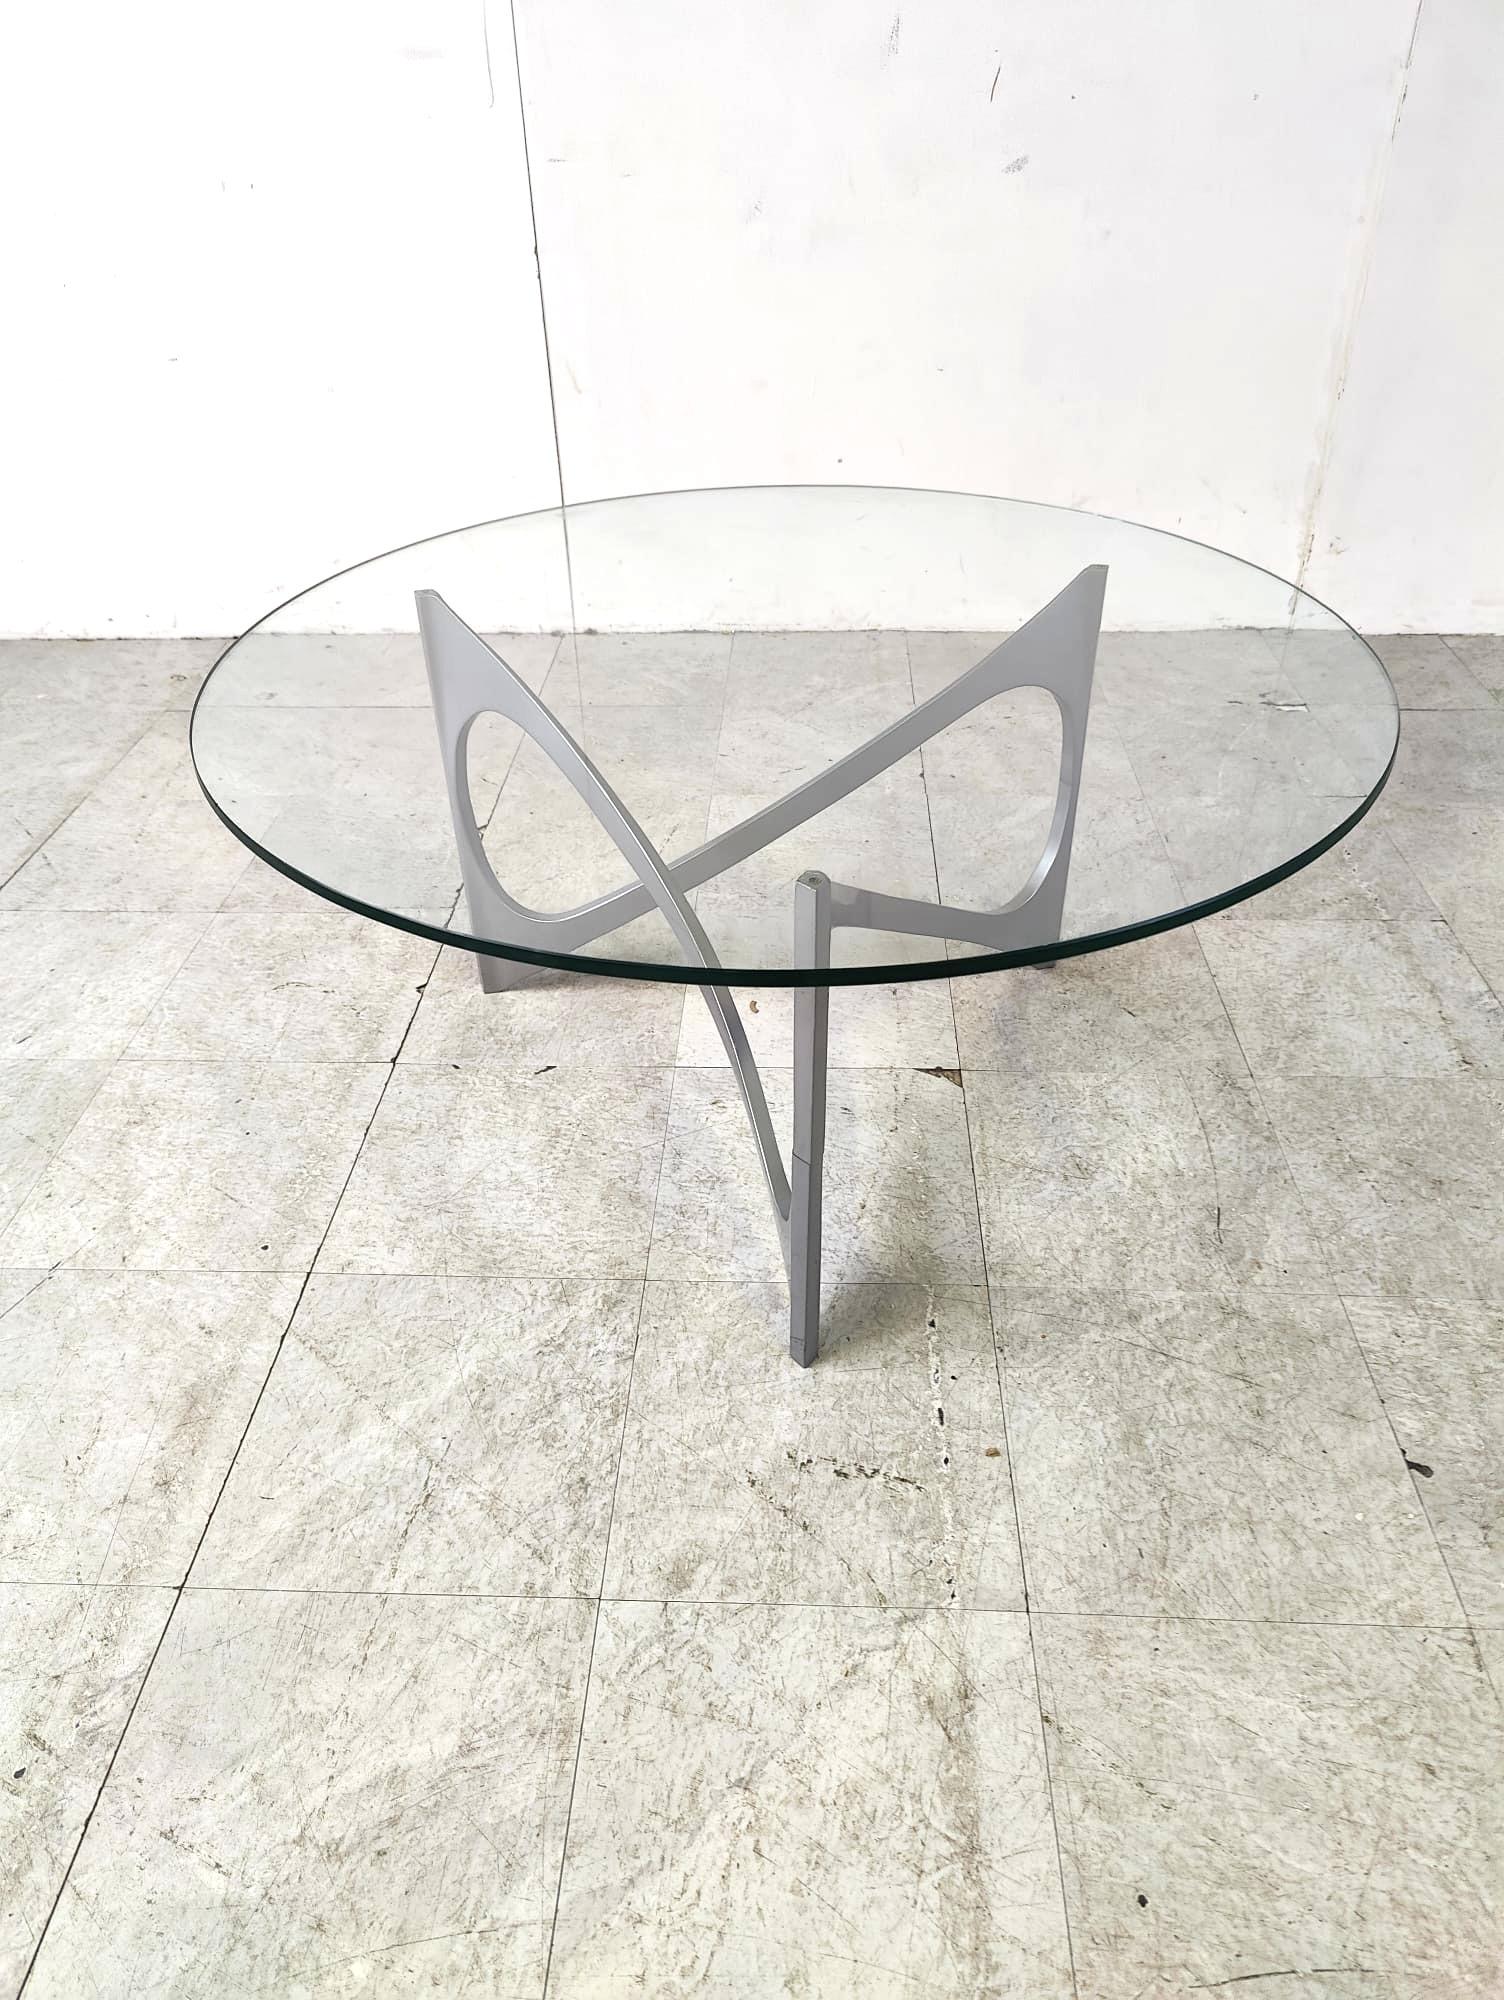 Sculptural aluminum coffee table by Knut Hesterberg for Ronald Schmitt

Beautiful timeless design.

One of the more rare tables from Knut Hesterberg.

Good condition.

1970s- Germany

Height: 48cm
Width: 100cm
Depth: 100cm

Note that we can also